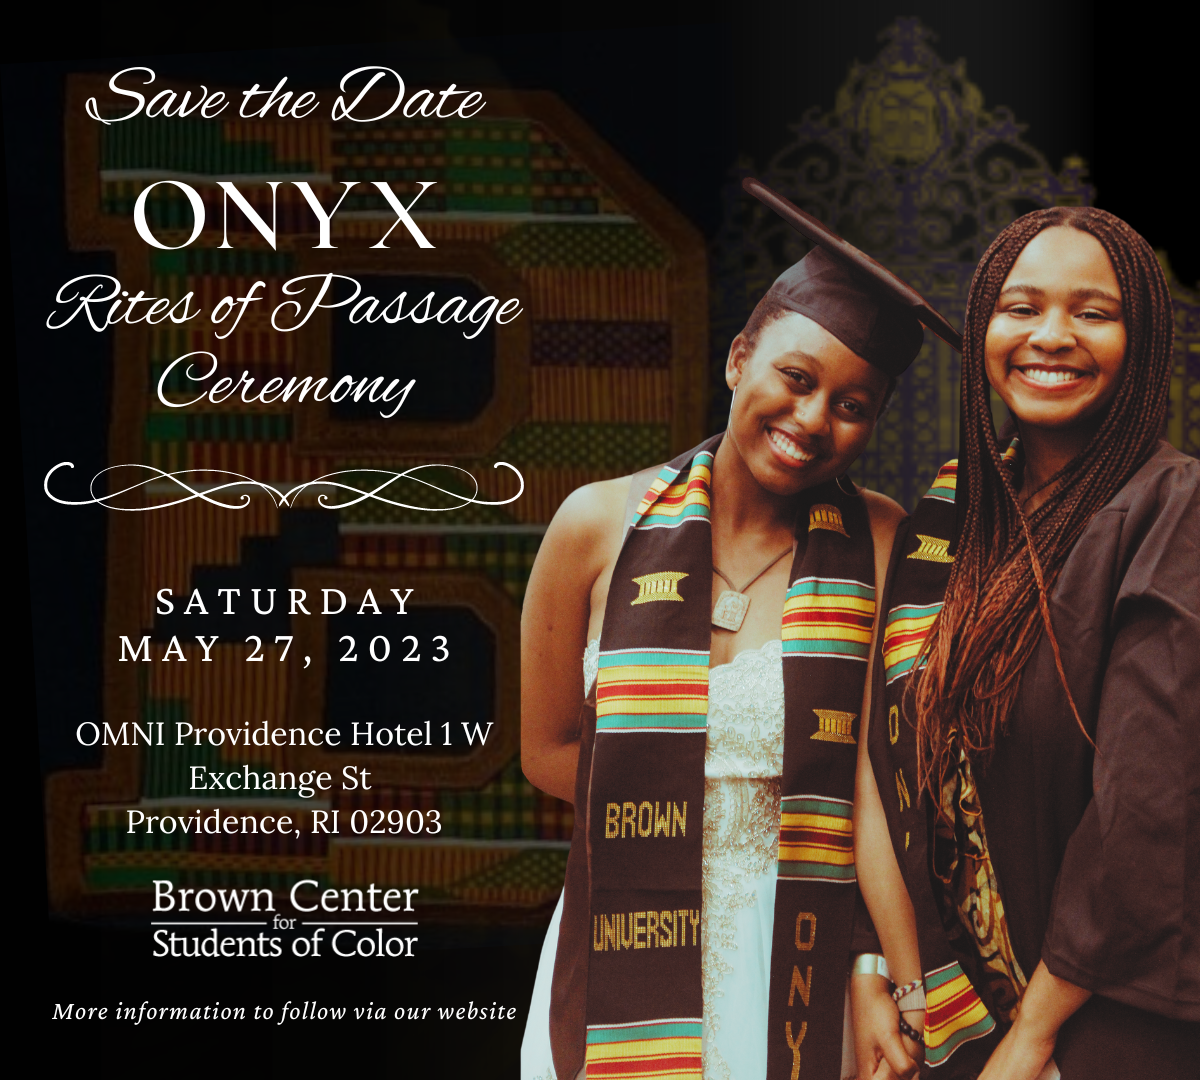 ONYX Save the Date